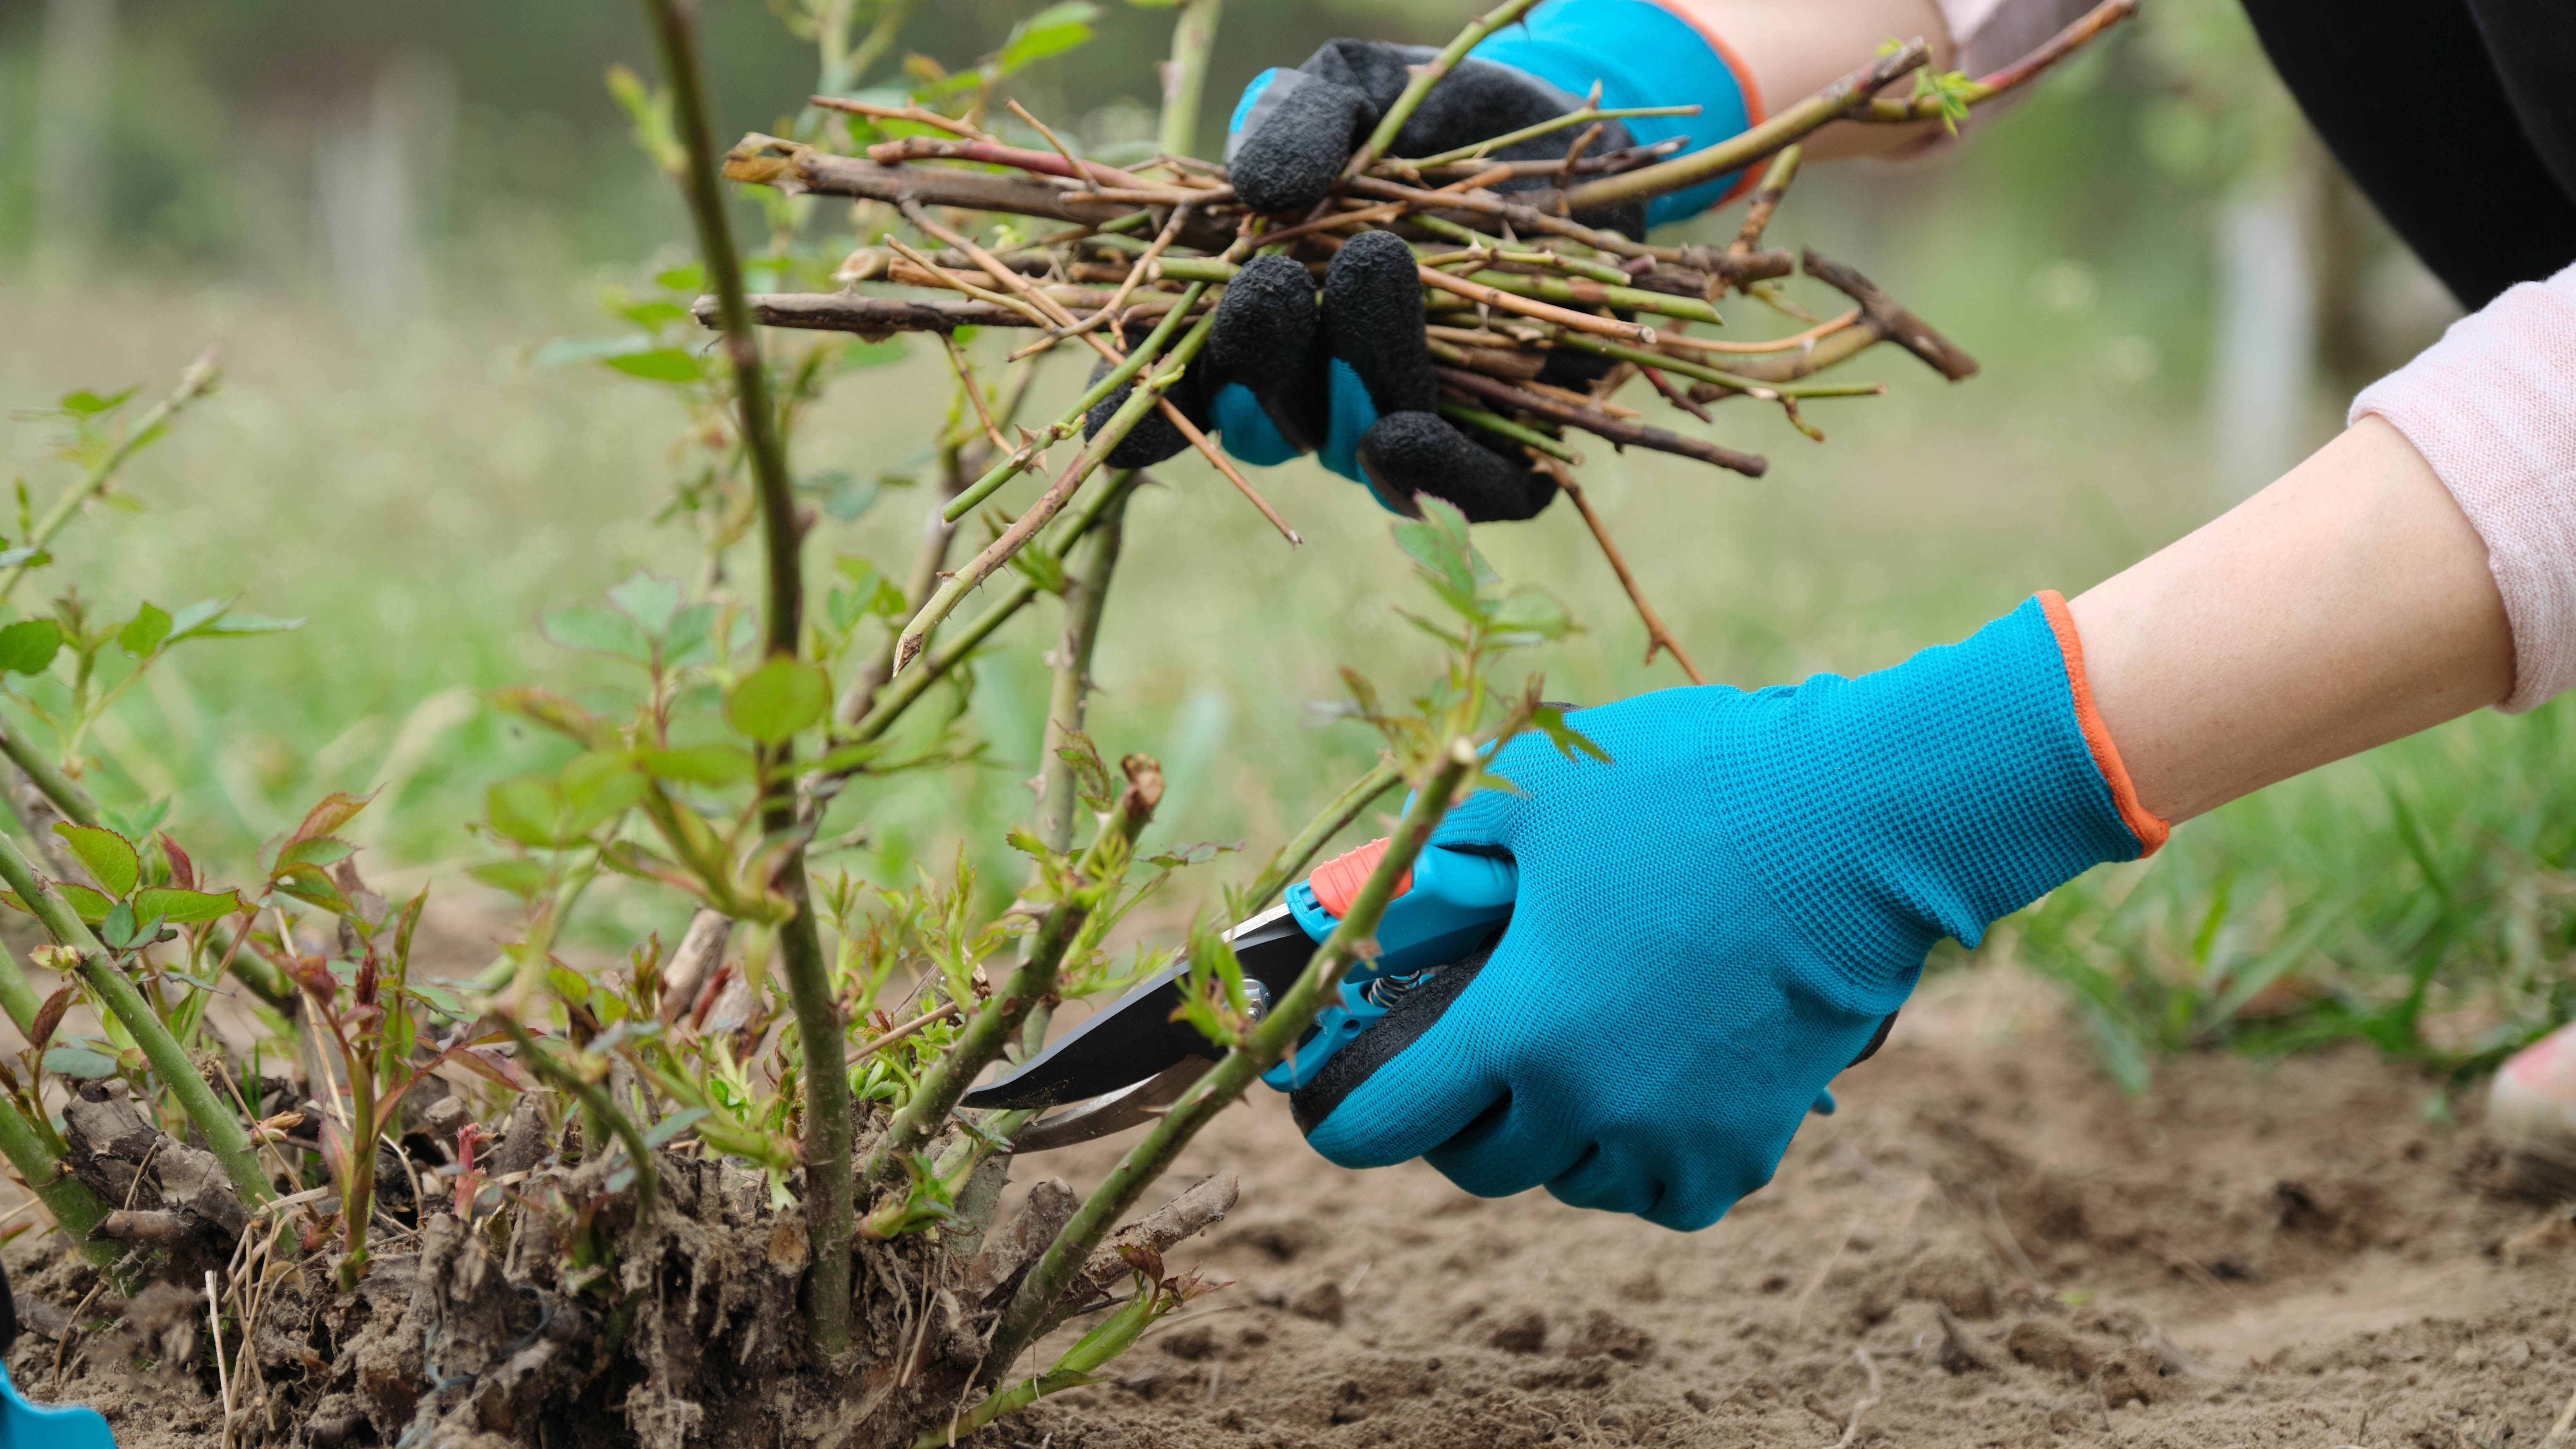 Person collecting cut stems while pruning rose stems